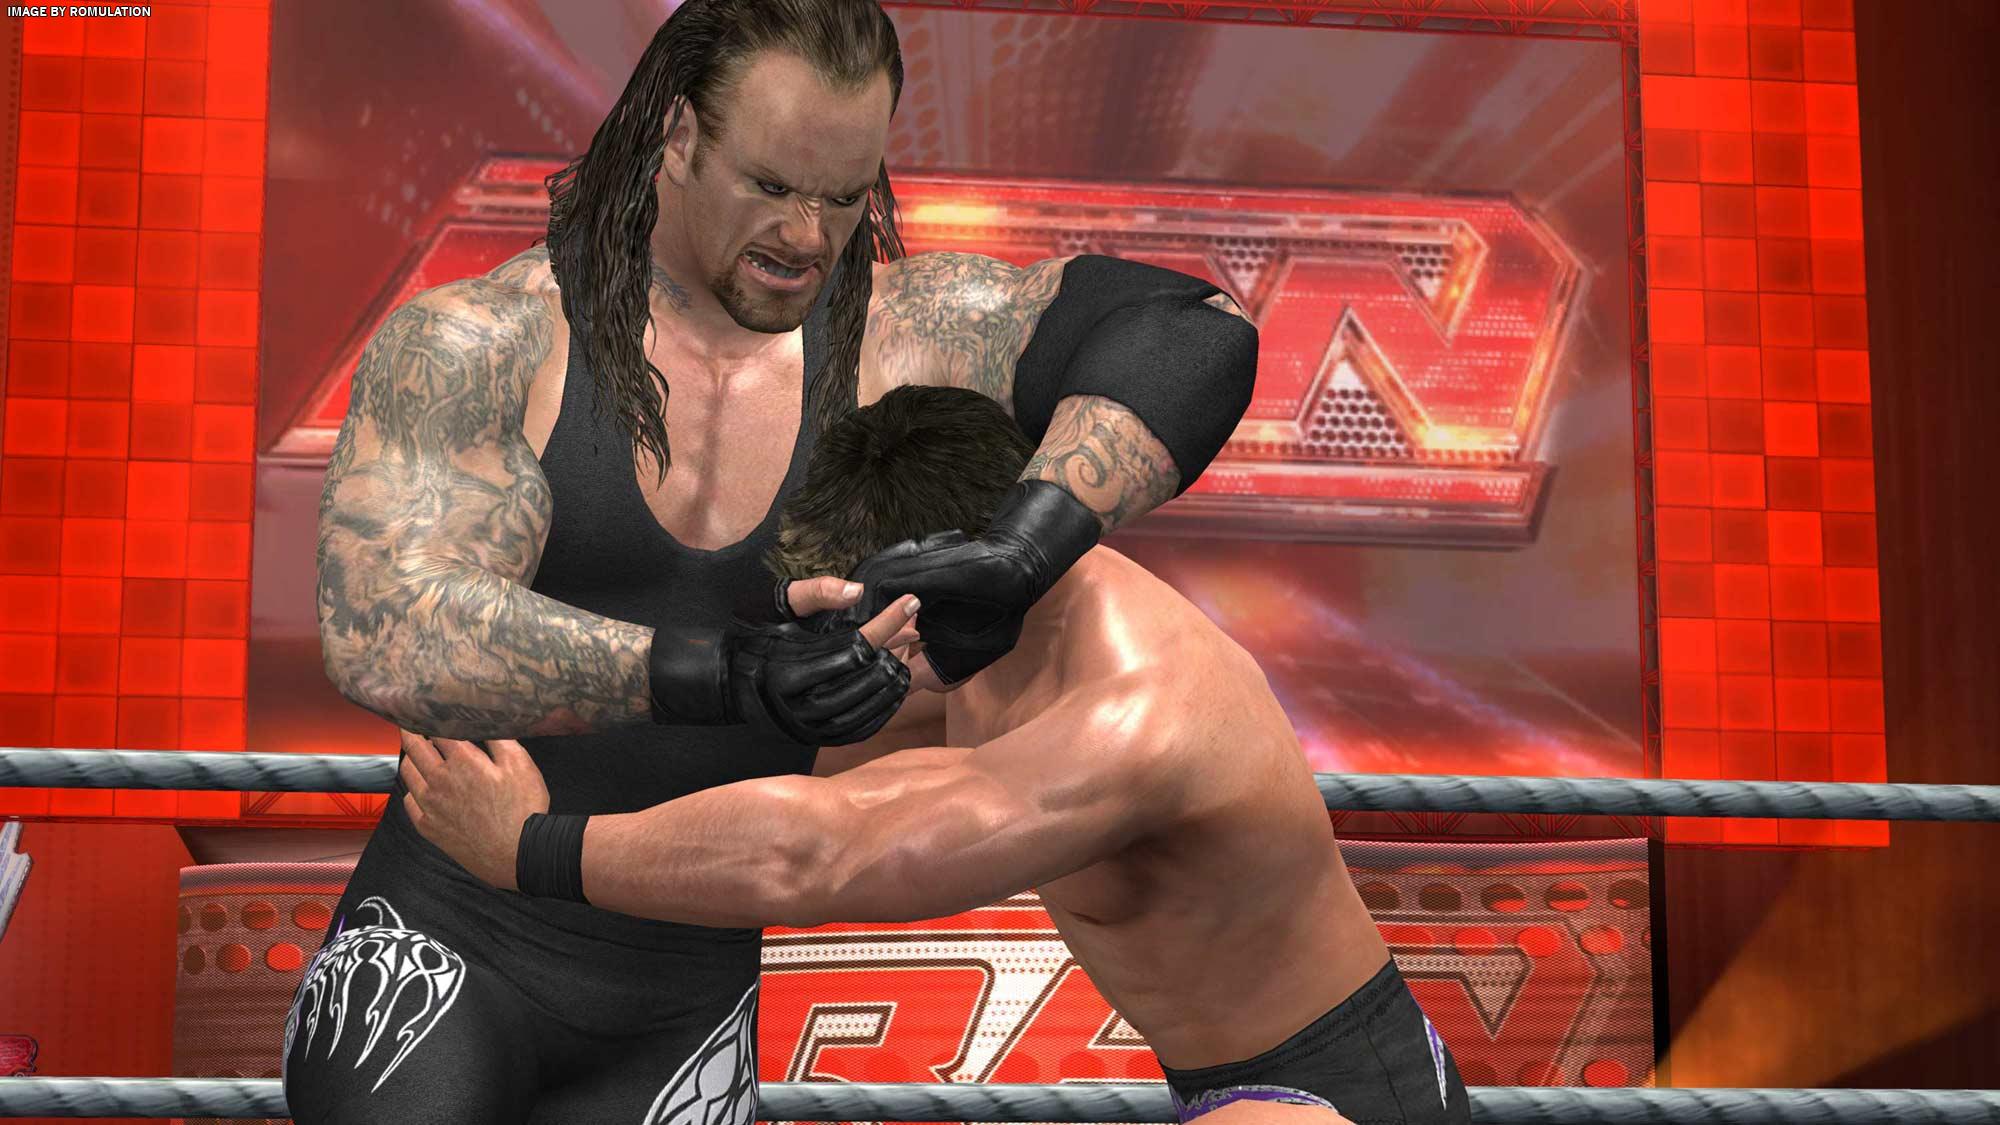 play station 2 wwe games